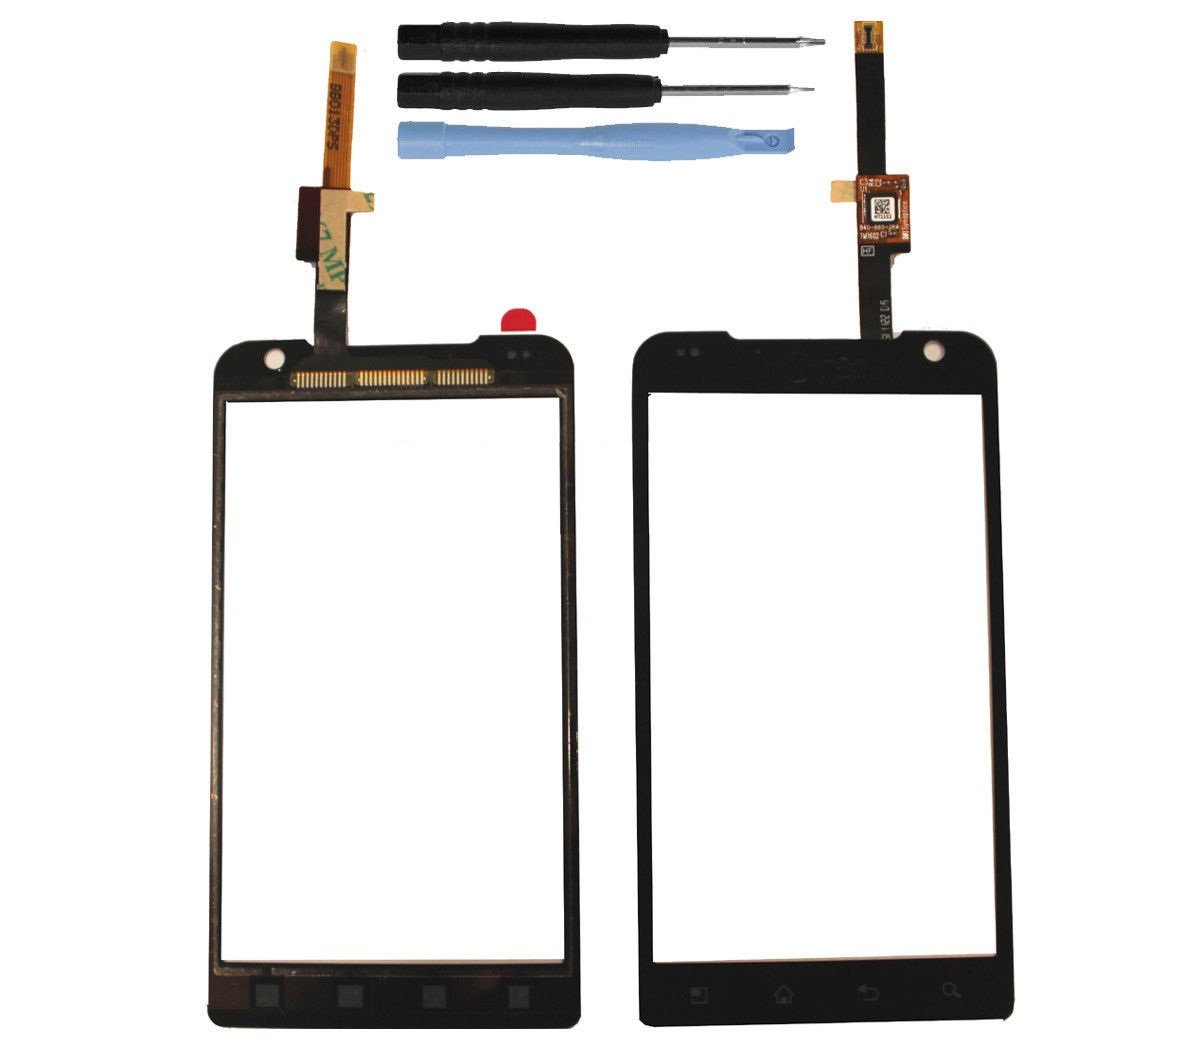 NEW Touch Screen Glass Digitizer Lens Replacement Part Tools For LG Esteem MS910